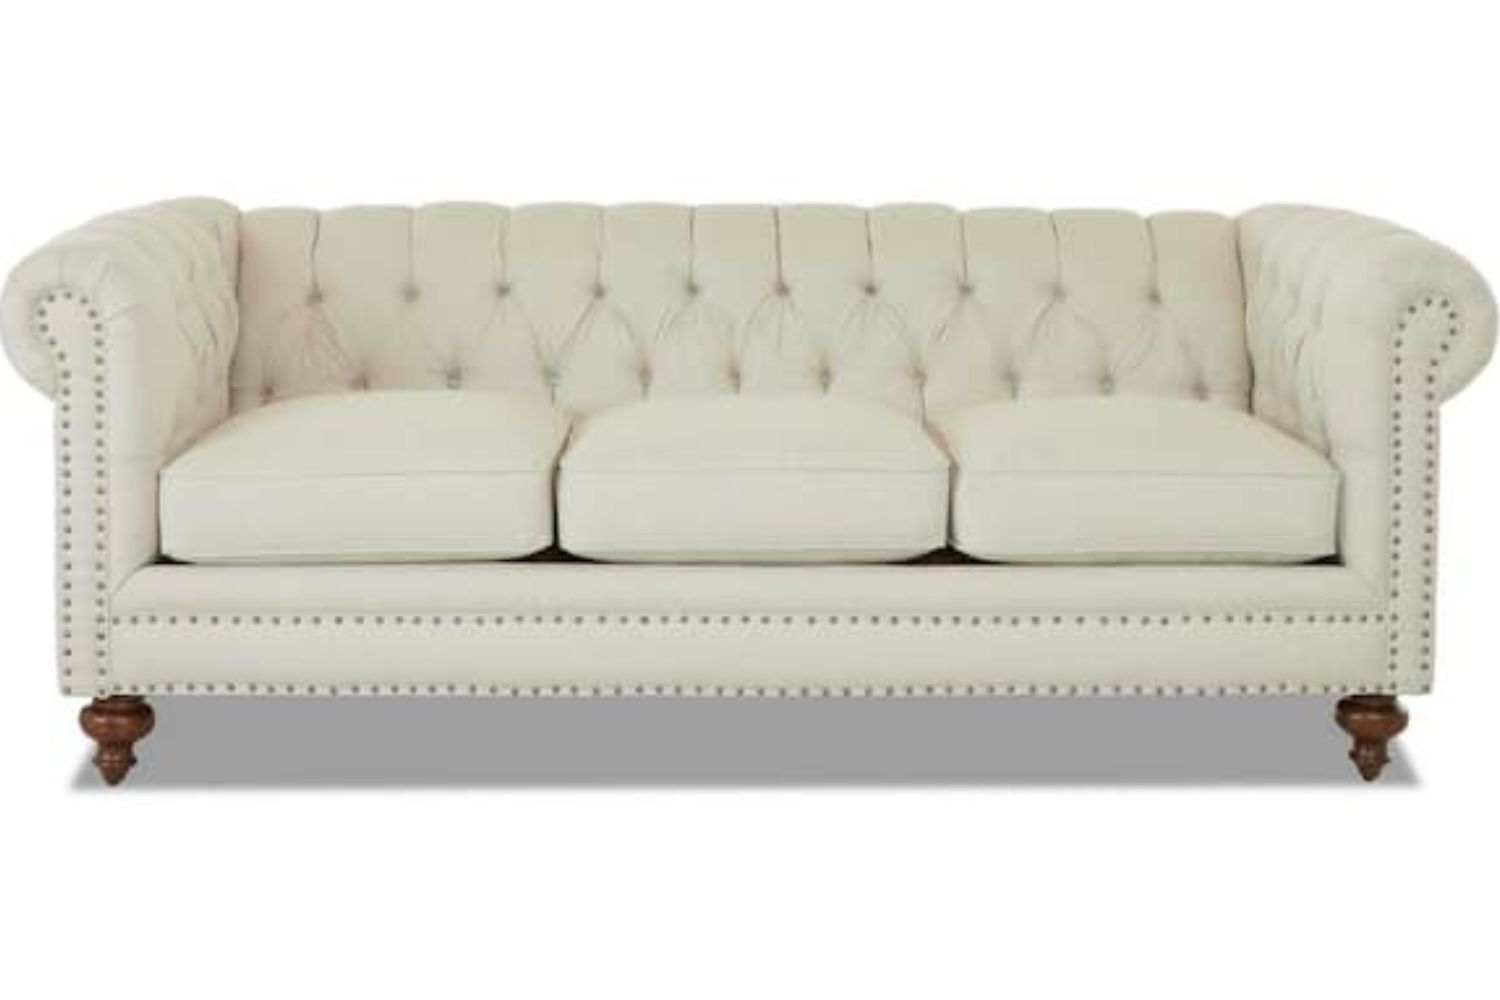 The Best Furniture You Can Find at Home Depot Right Now: Home Decorators Collection Blakely 95 in. 3-Seater Chesterfield Sofa 